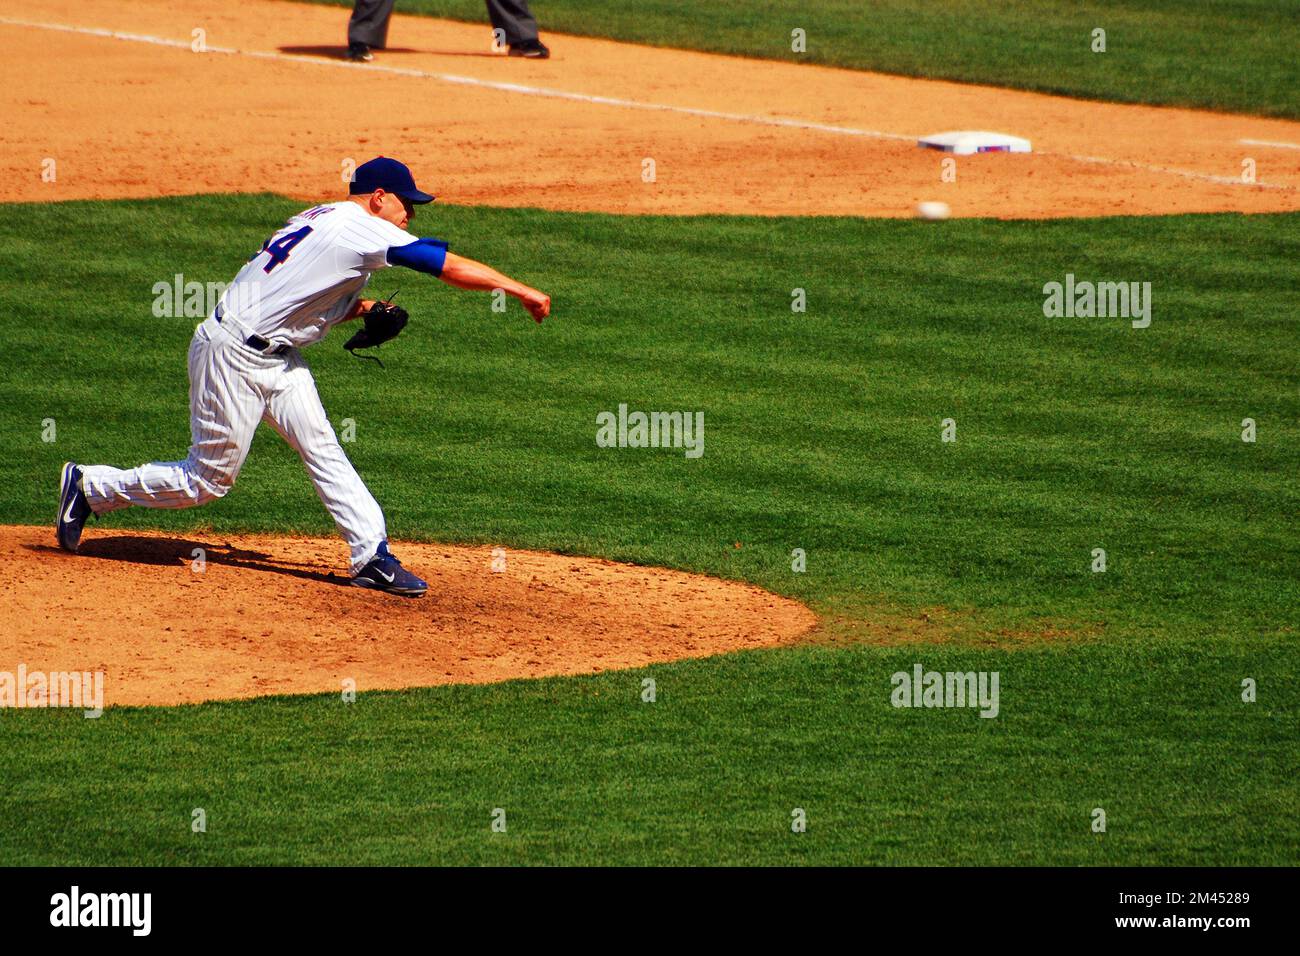 A Chicago Cubs pitcher fires a fastball at Wrigley Field during a baseball game Stock Photo